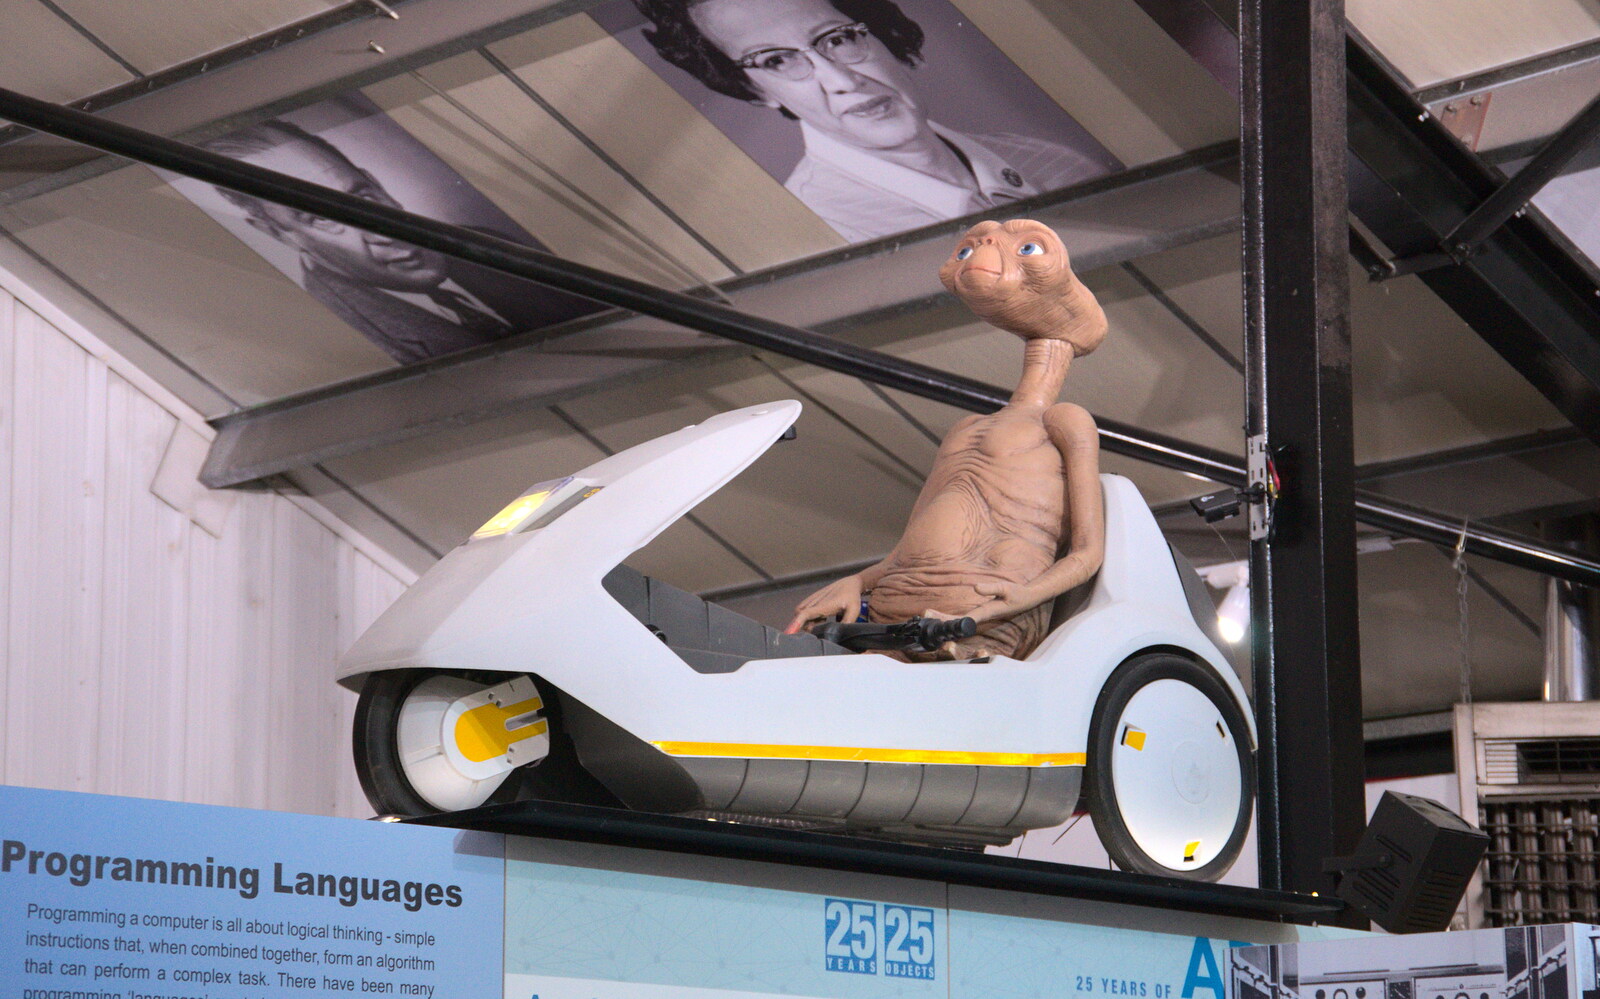 ET in a Sinclair C5 from The Retro Computer Festival, Centre For Computing History, Cambridge - 15th September 2018